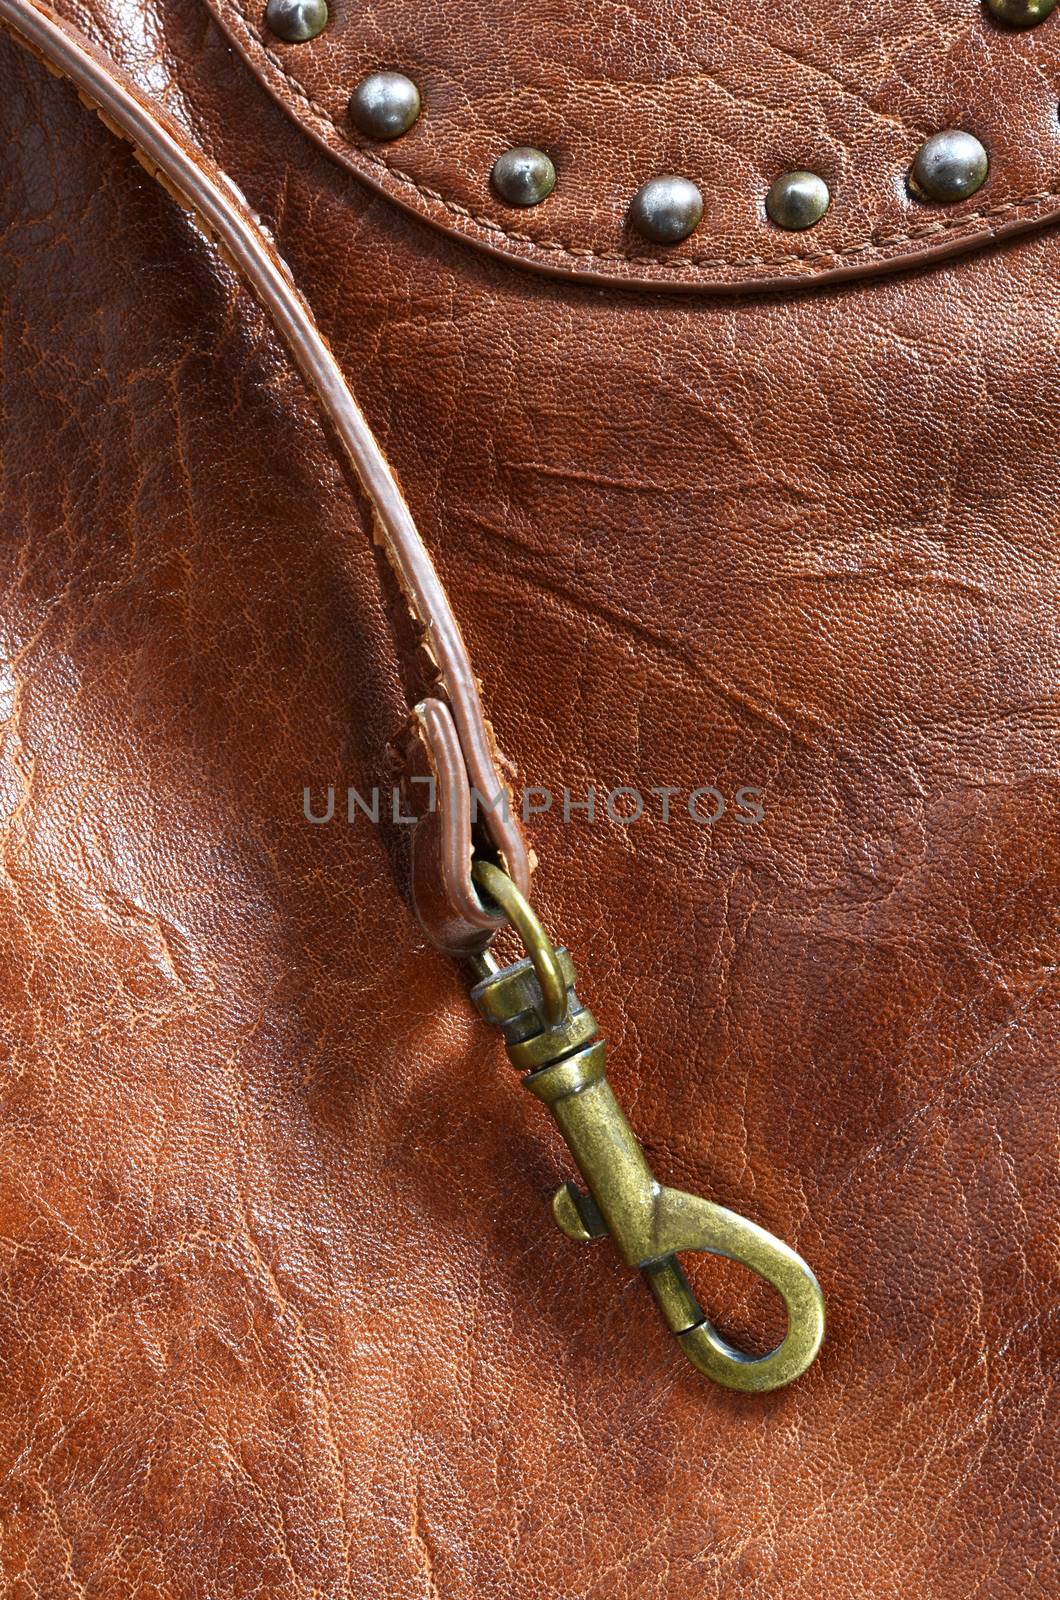 leather bag detail